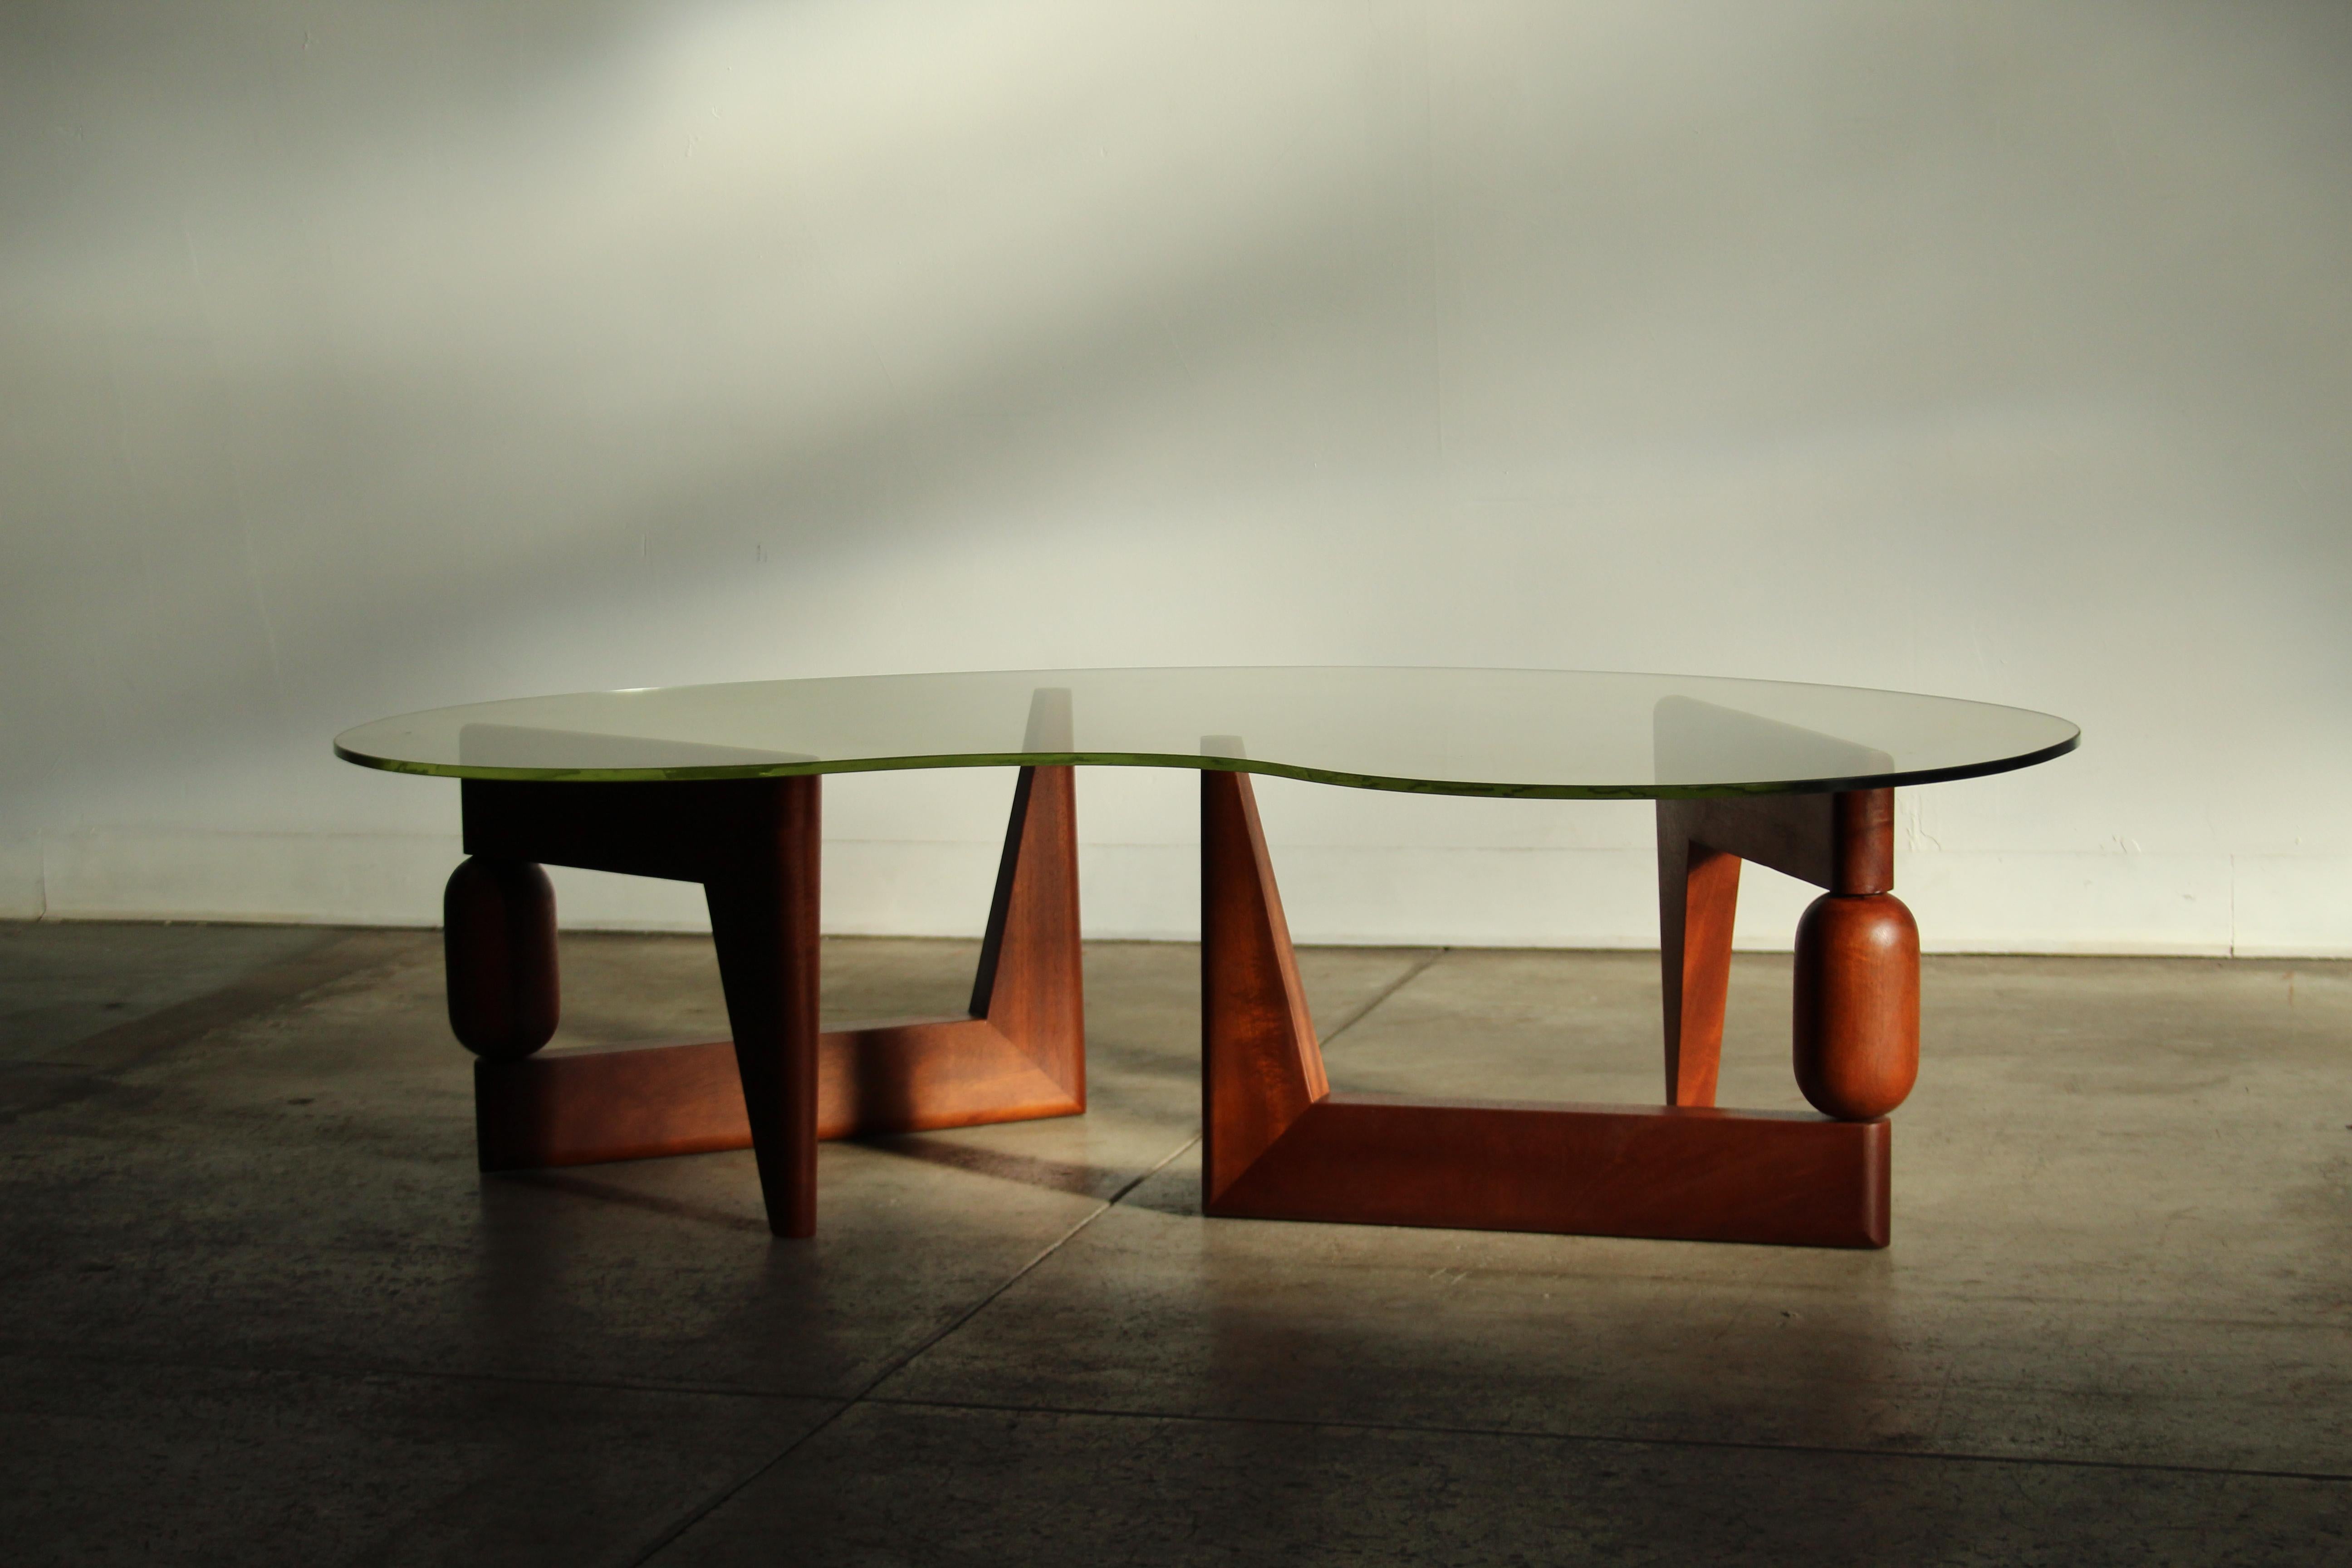 Sculptural Freeform Coffee Table in the Manner of Isamu Noguchi, 1970s For Sale 7